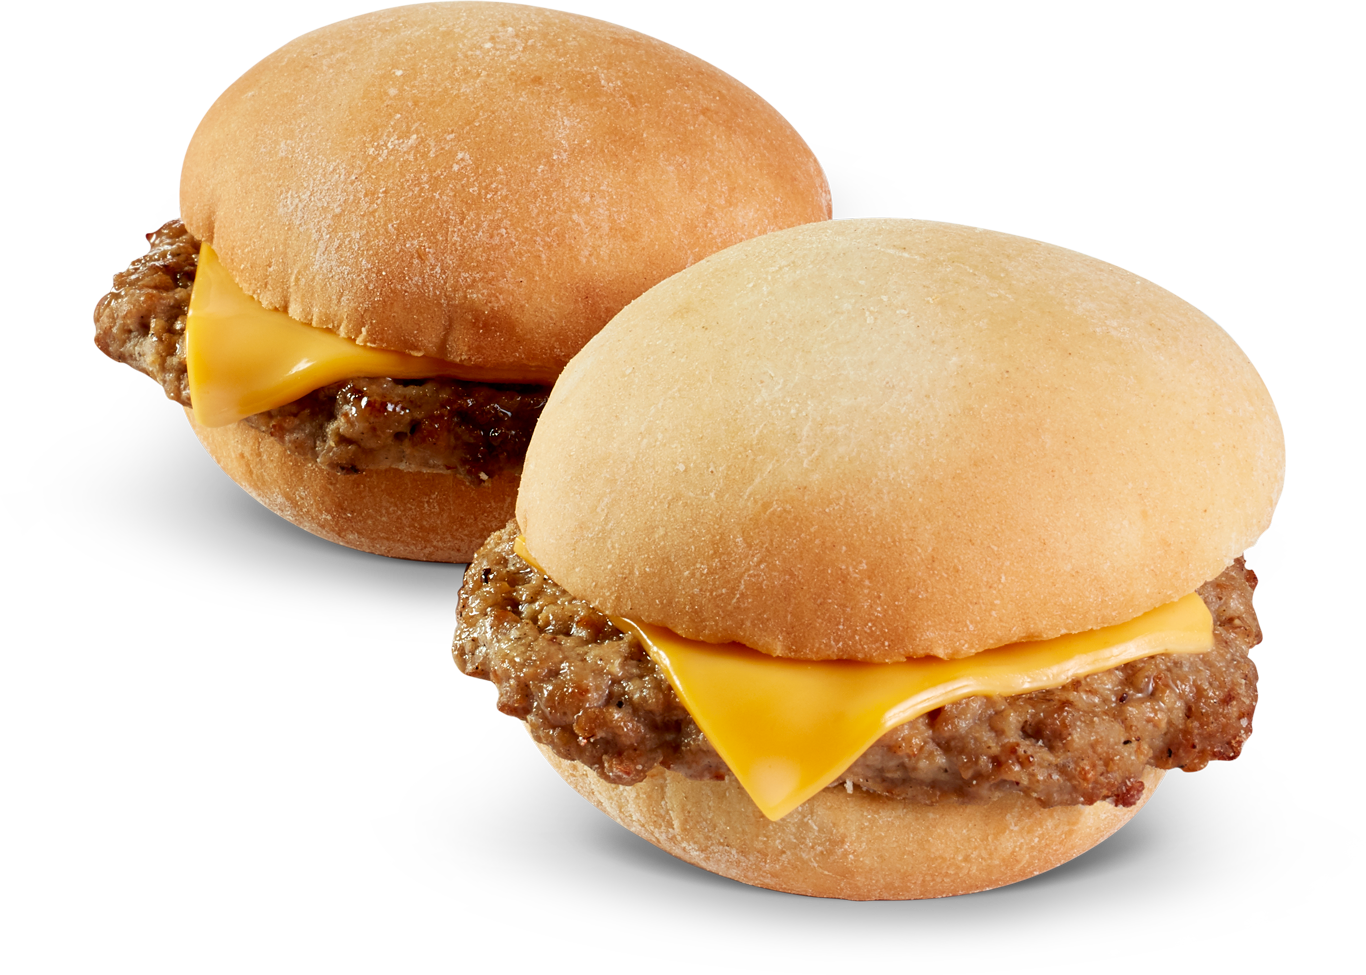 AdvancePierre™ Fully Cooked Mini Twin Flamebroiled Beef Pattie with Cheese on a Whole Grain Bun, 5.50oz